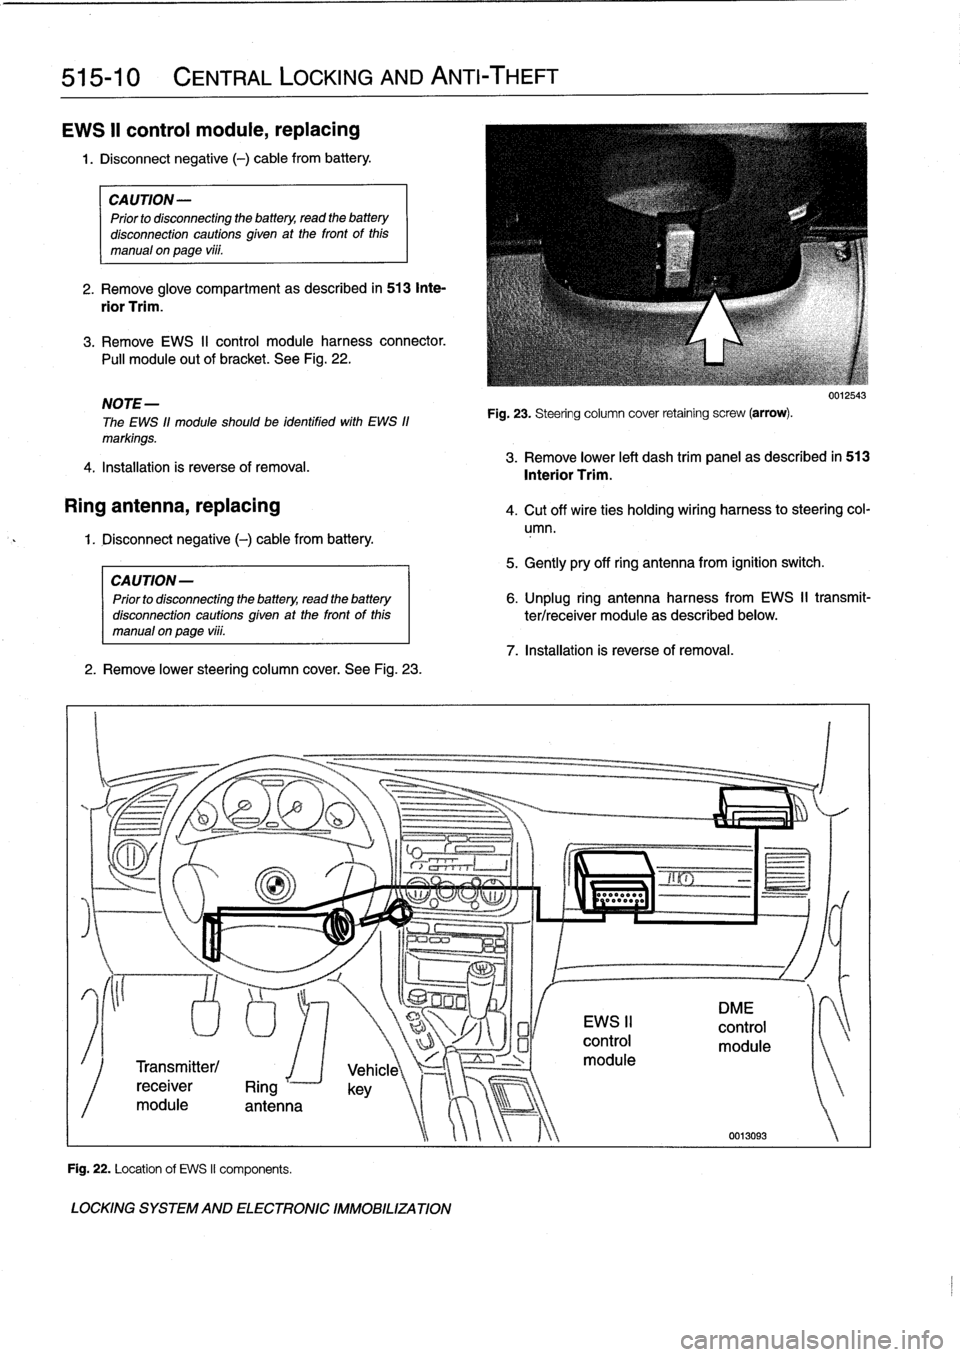 BMW 325i 1996 E36 Workshop Manual 
515-10

	

CENTRAL
LOCKING
AND
ANTI-THEFT

EWS
II
control
module,
replacing

1
.
Disconnect
negative
(-)
cable
from
battery
.

CAUTION-

Prior
to
disconnecting
the
battery,
read
the
battery

disconne